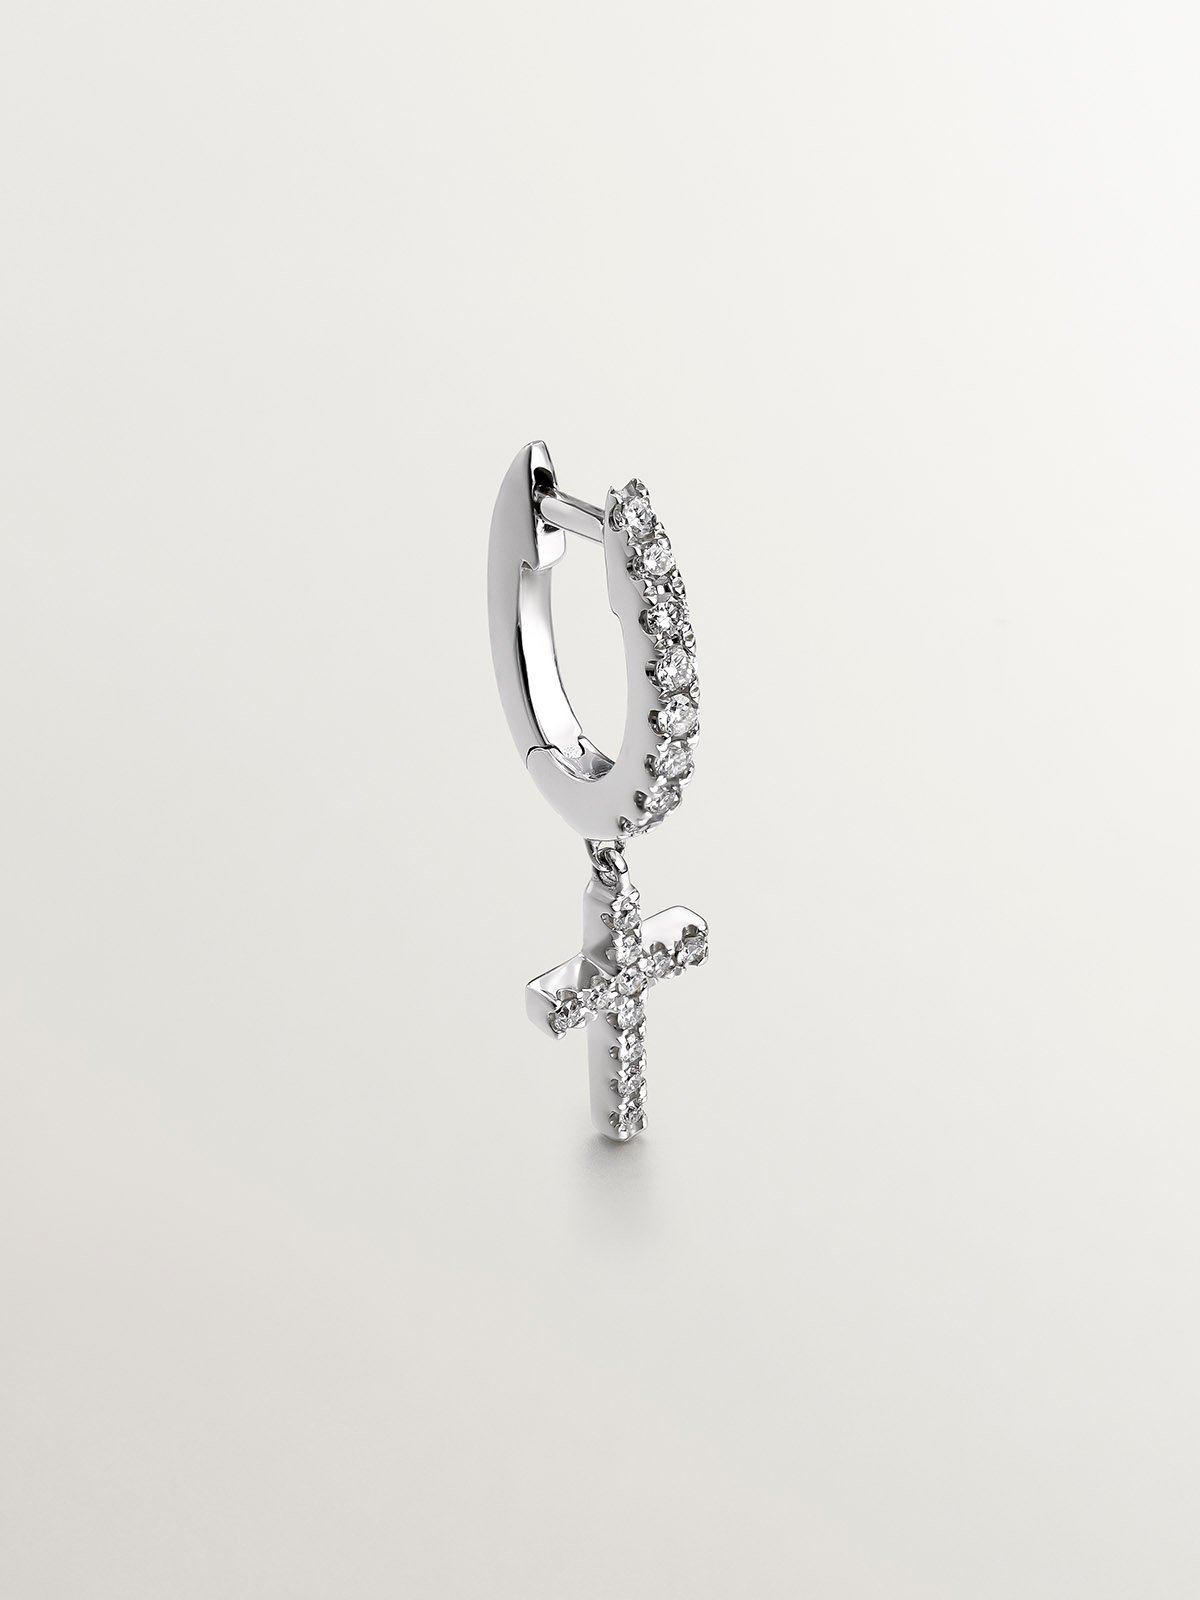 Single 18K white gold earring with diamonds and cross.